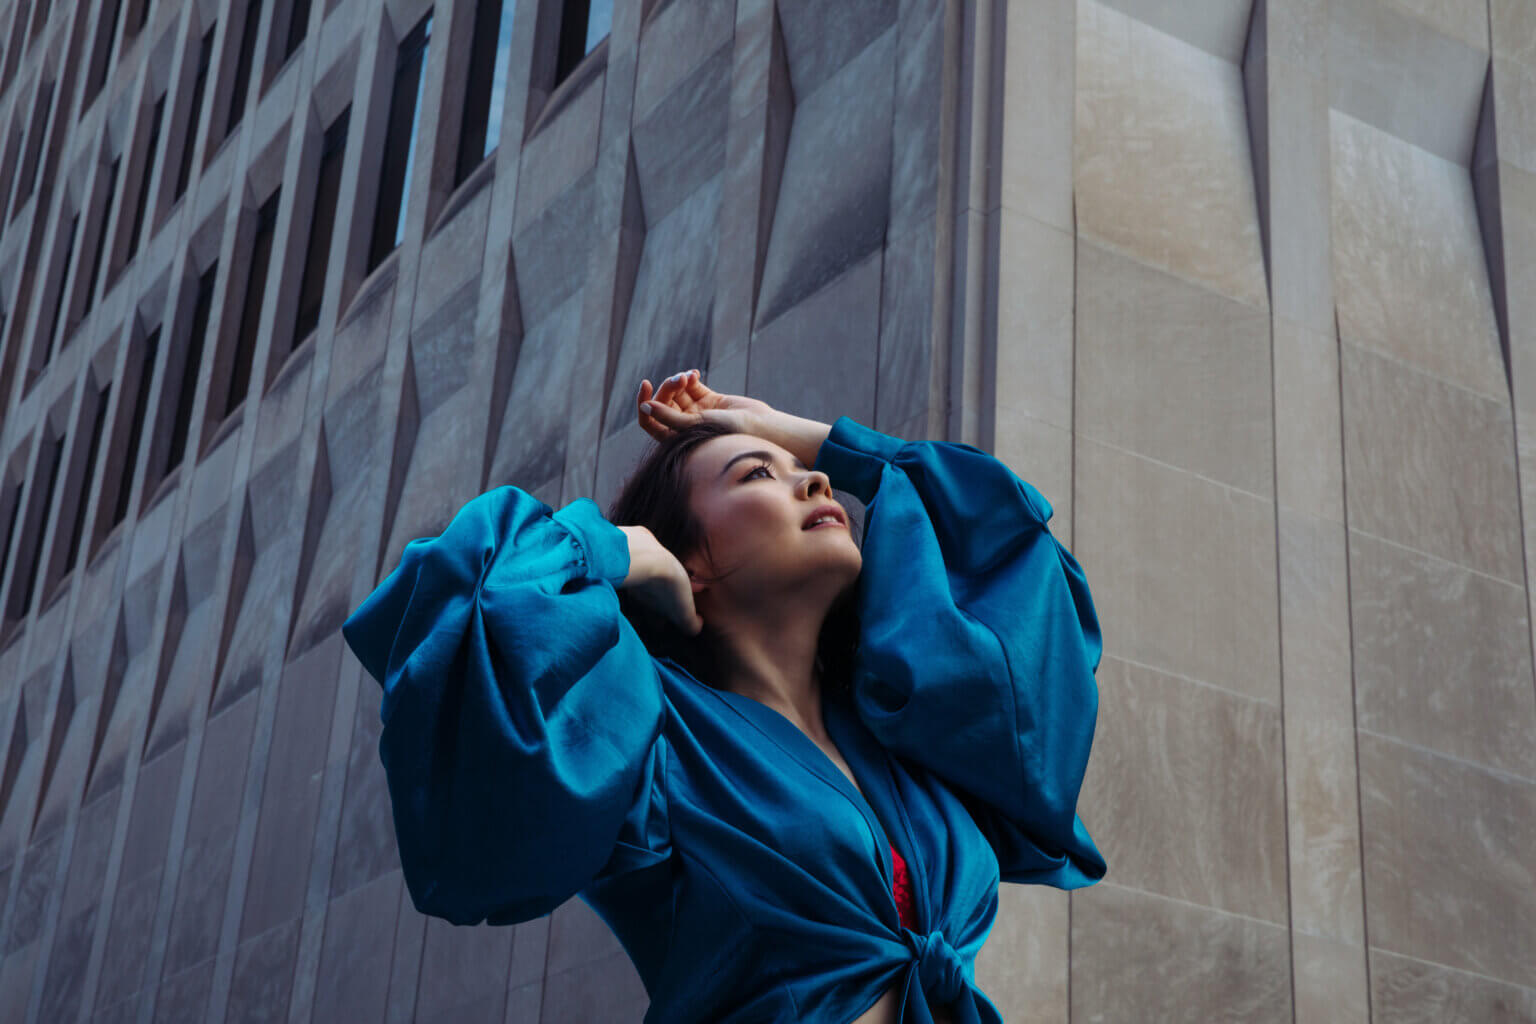 Mitski is back with new single/video “Working for the Knife.” The track features the production by longtime collaborator Patrick Hyland